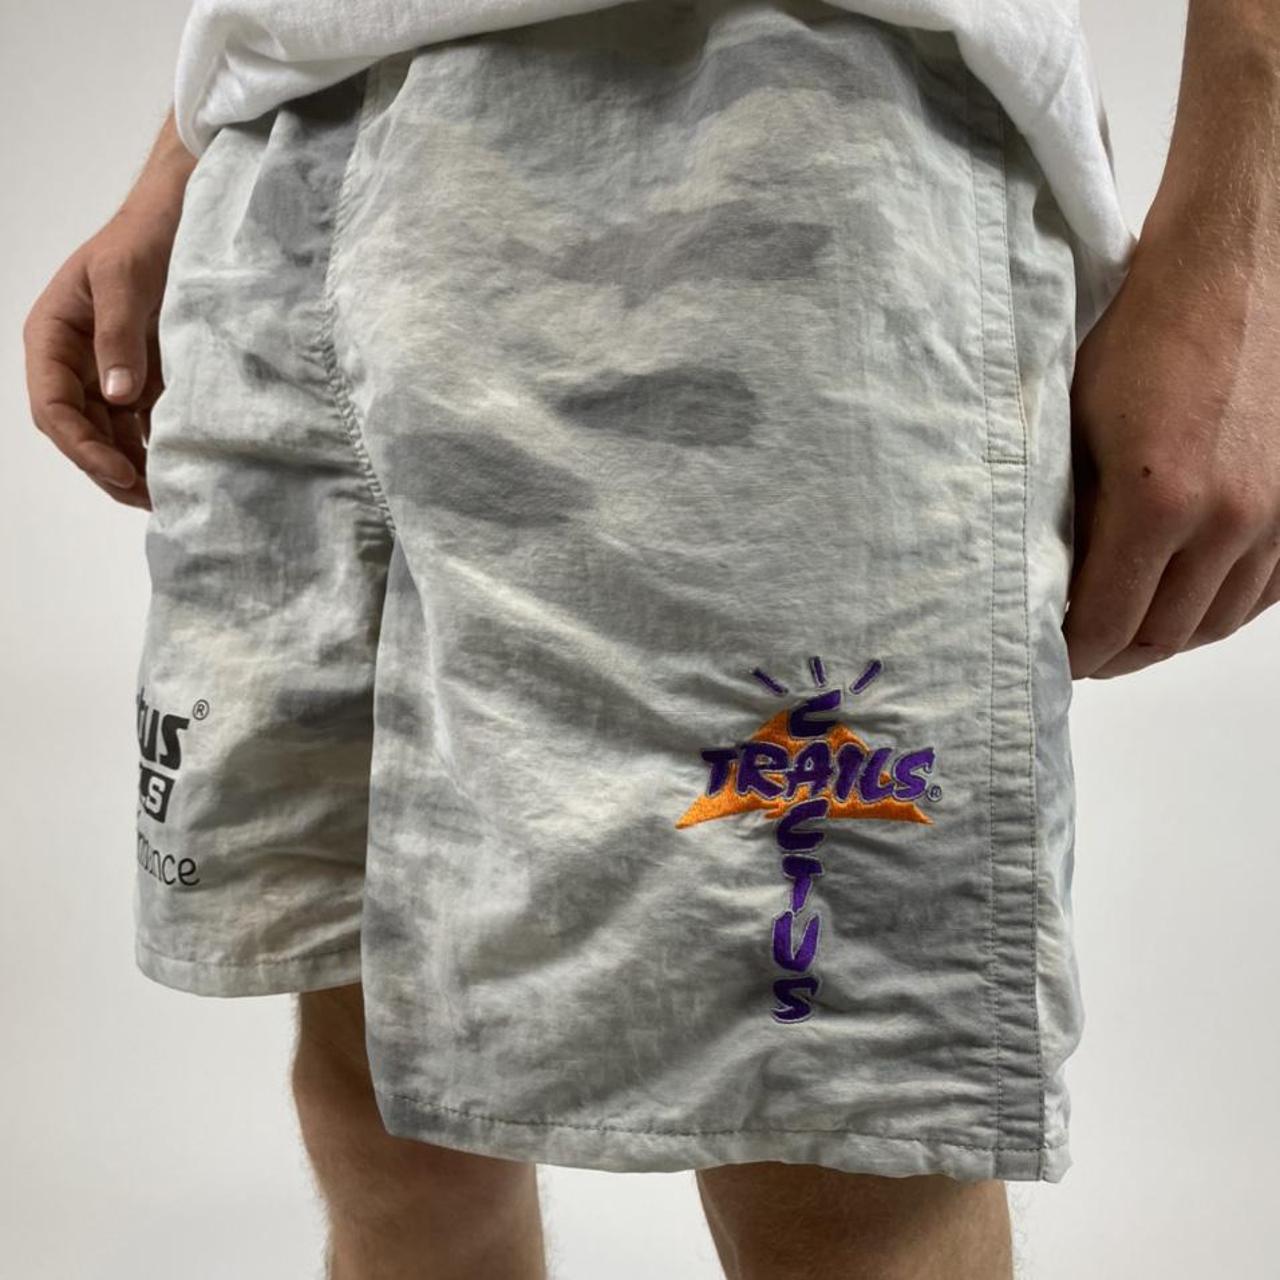 Travis Scott trails shorts, Love the cloudy marble...